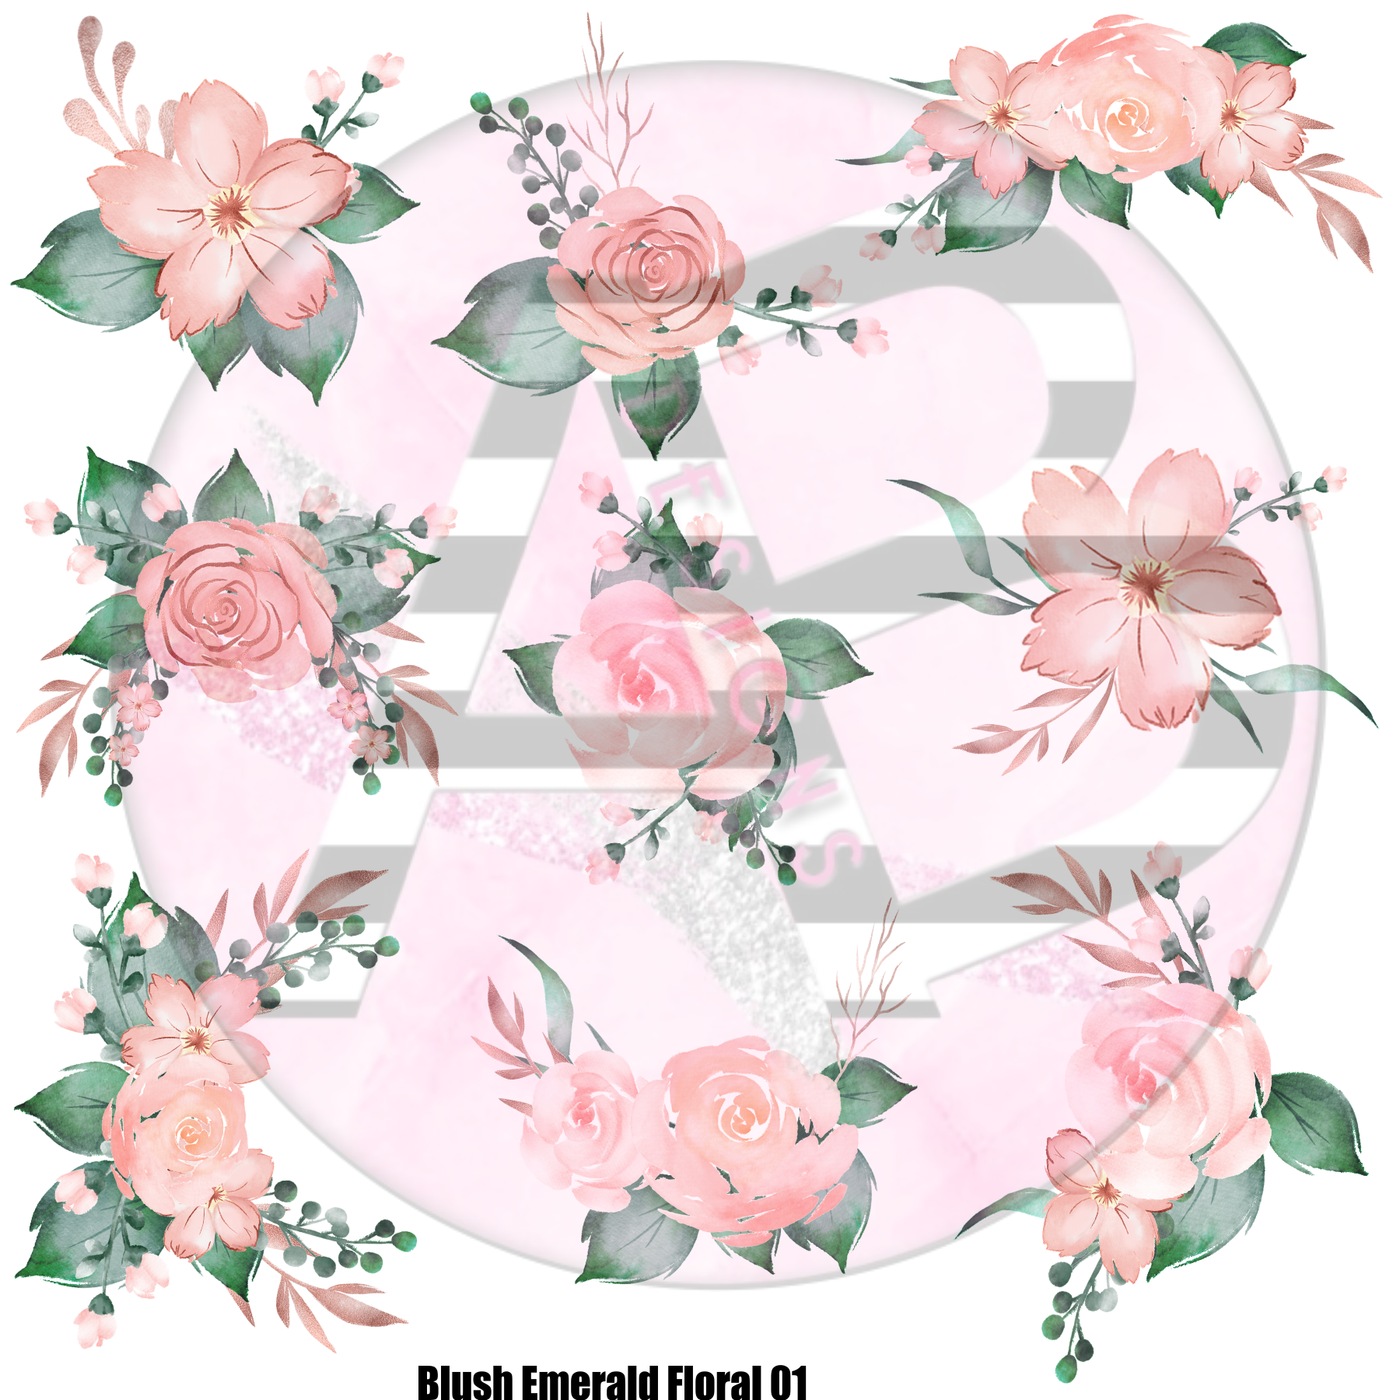 Blush and Emerald Floral 01 Full Sheet 12x12 - Clear Sheet